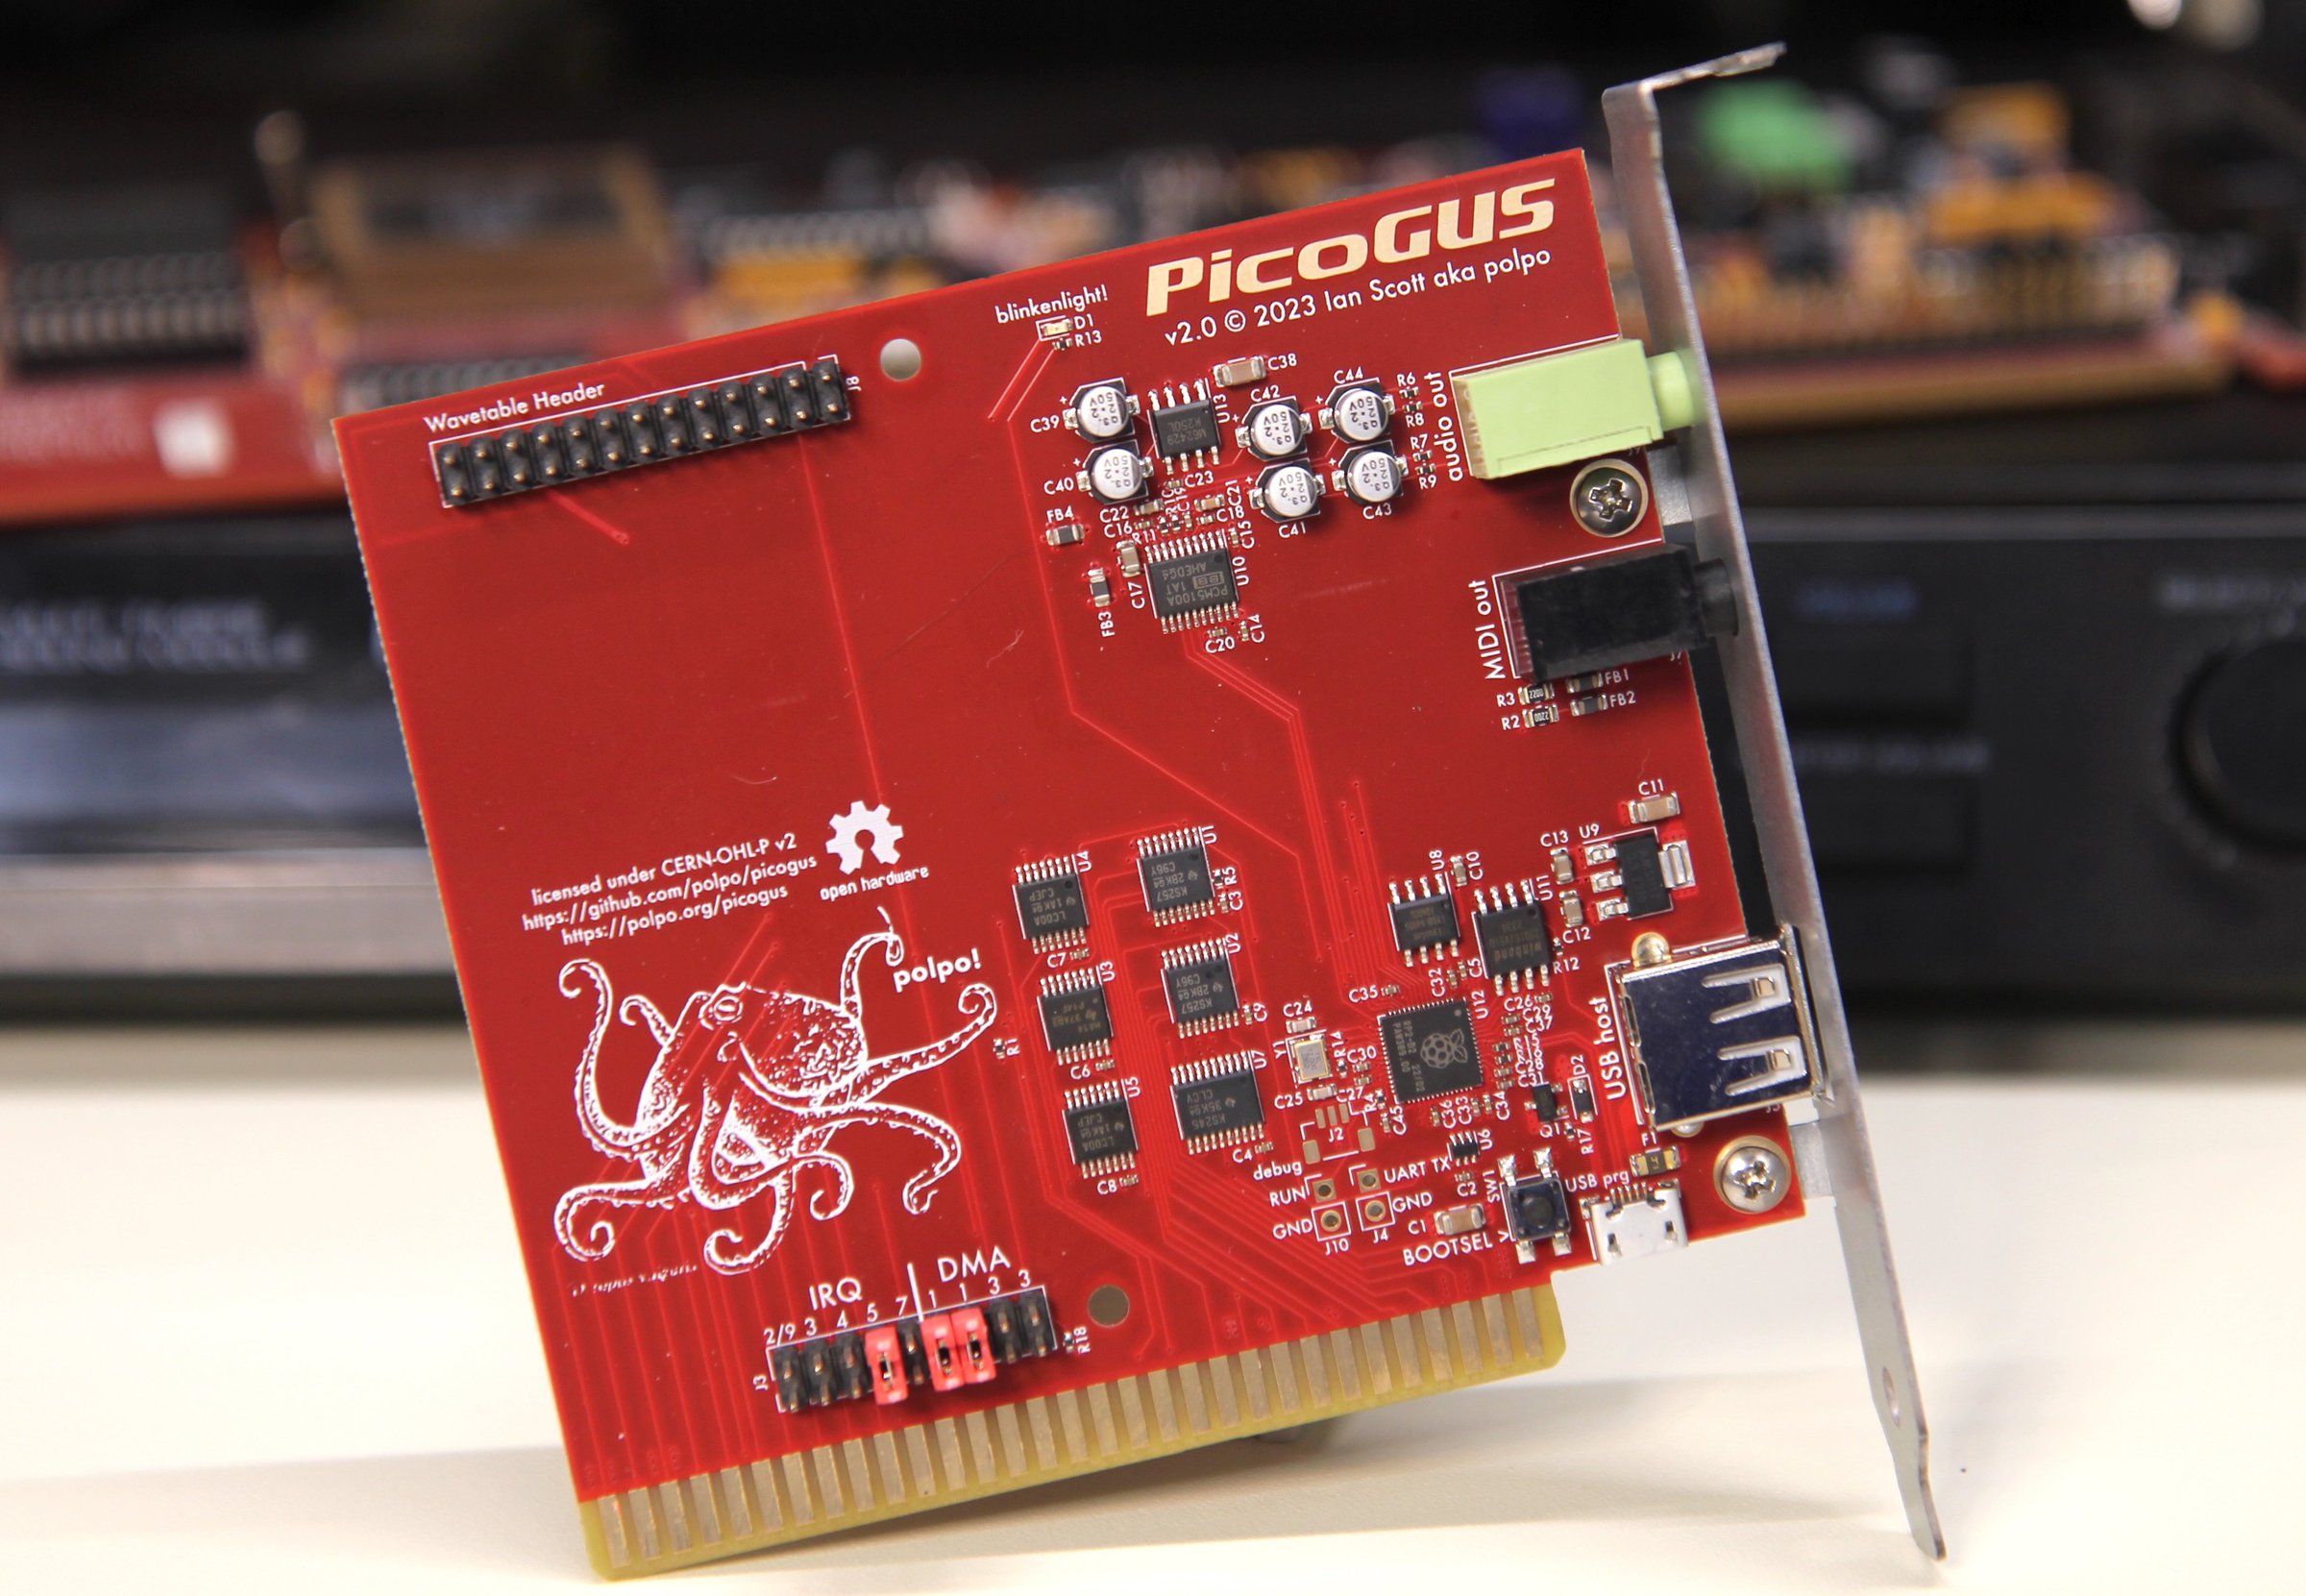 The PicoGUS 2.0 board in a deep red color. There is no Pico board on this version - everything is directly on the board.